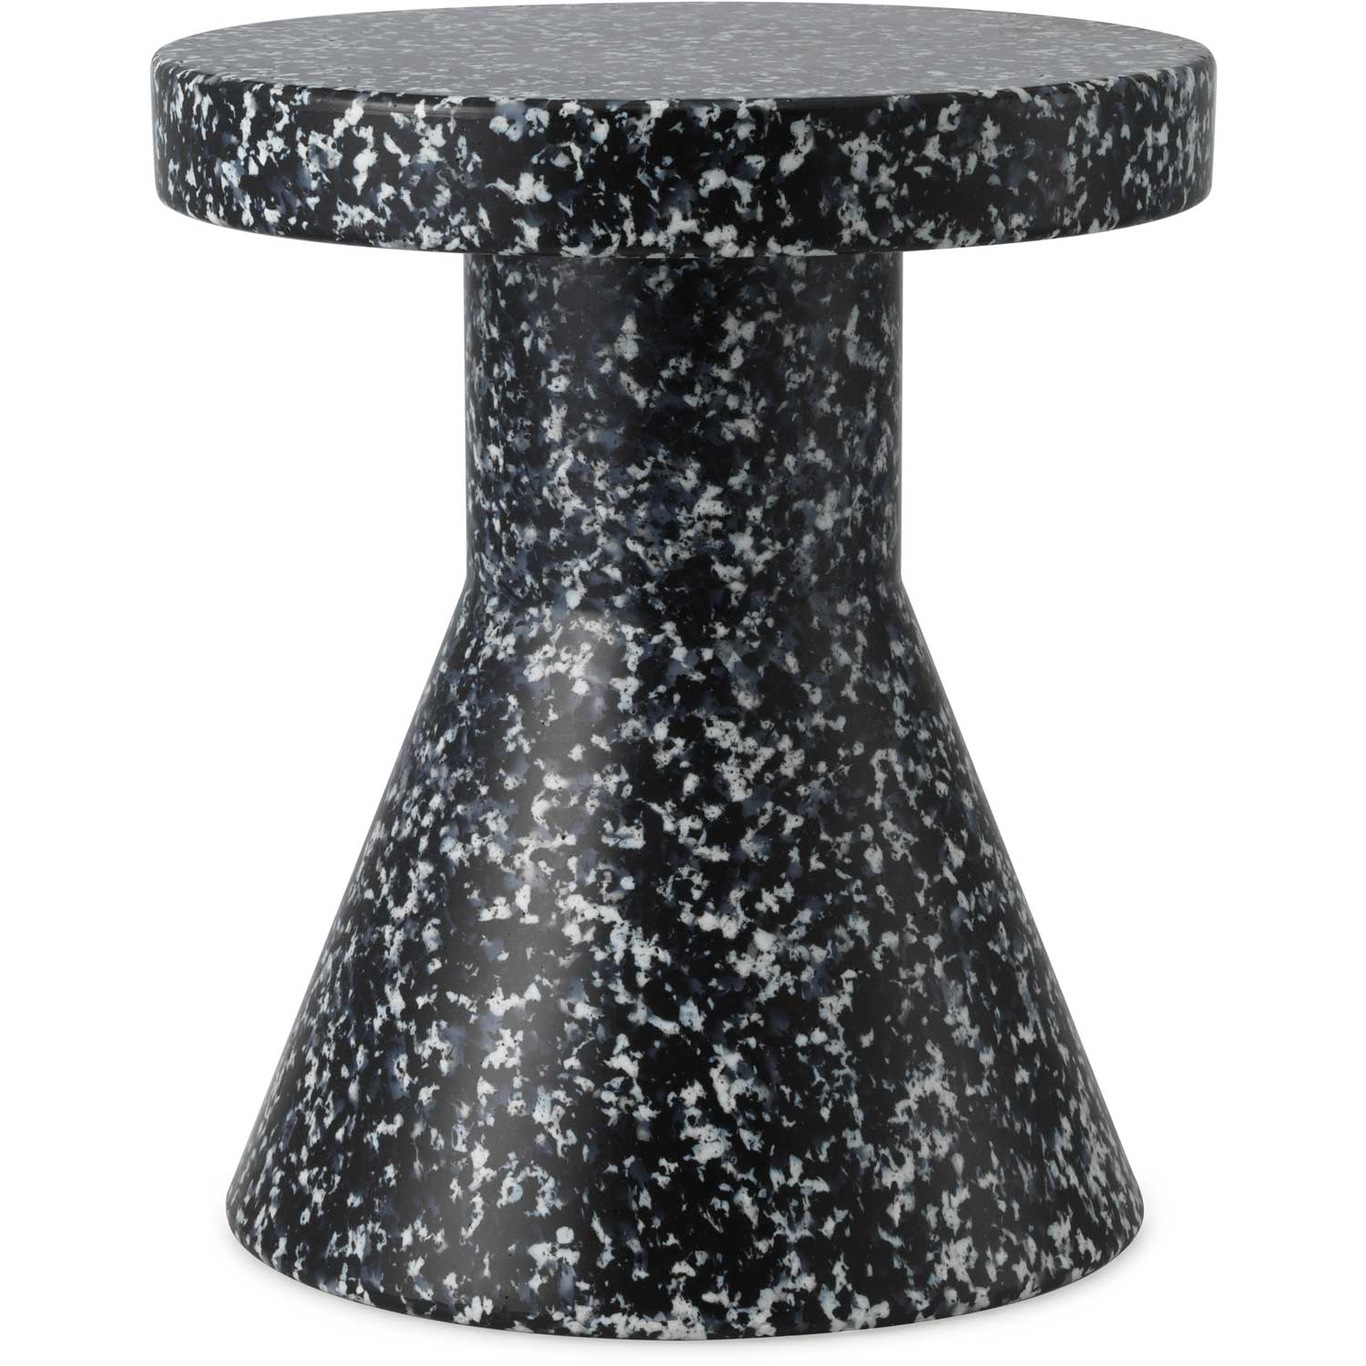 Bit Stool / Side Table, Cone-shaped, Black And White